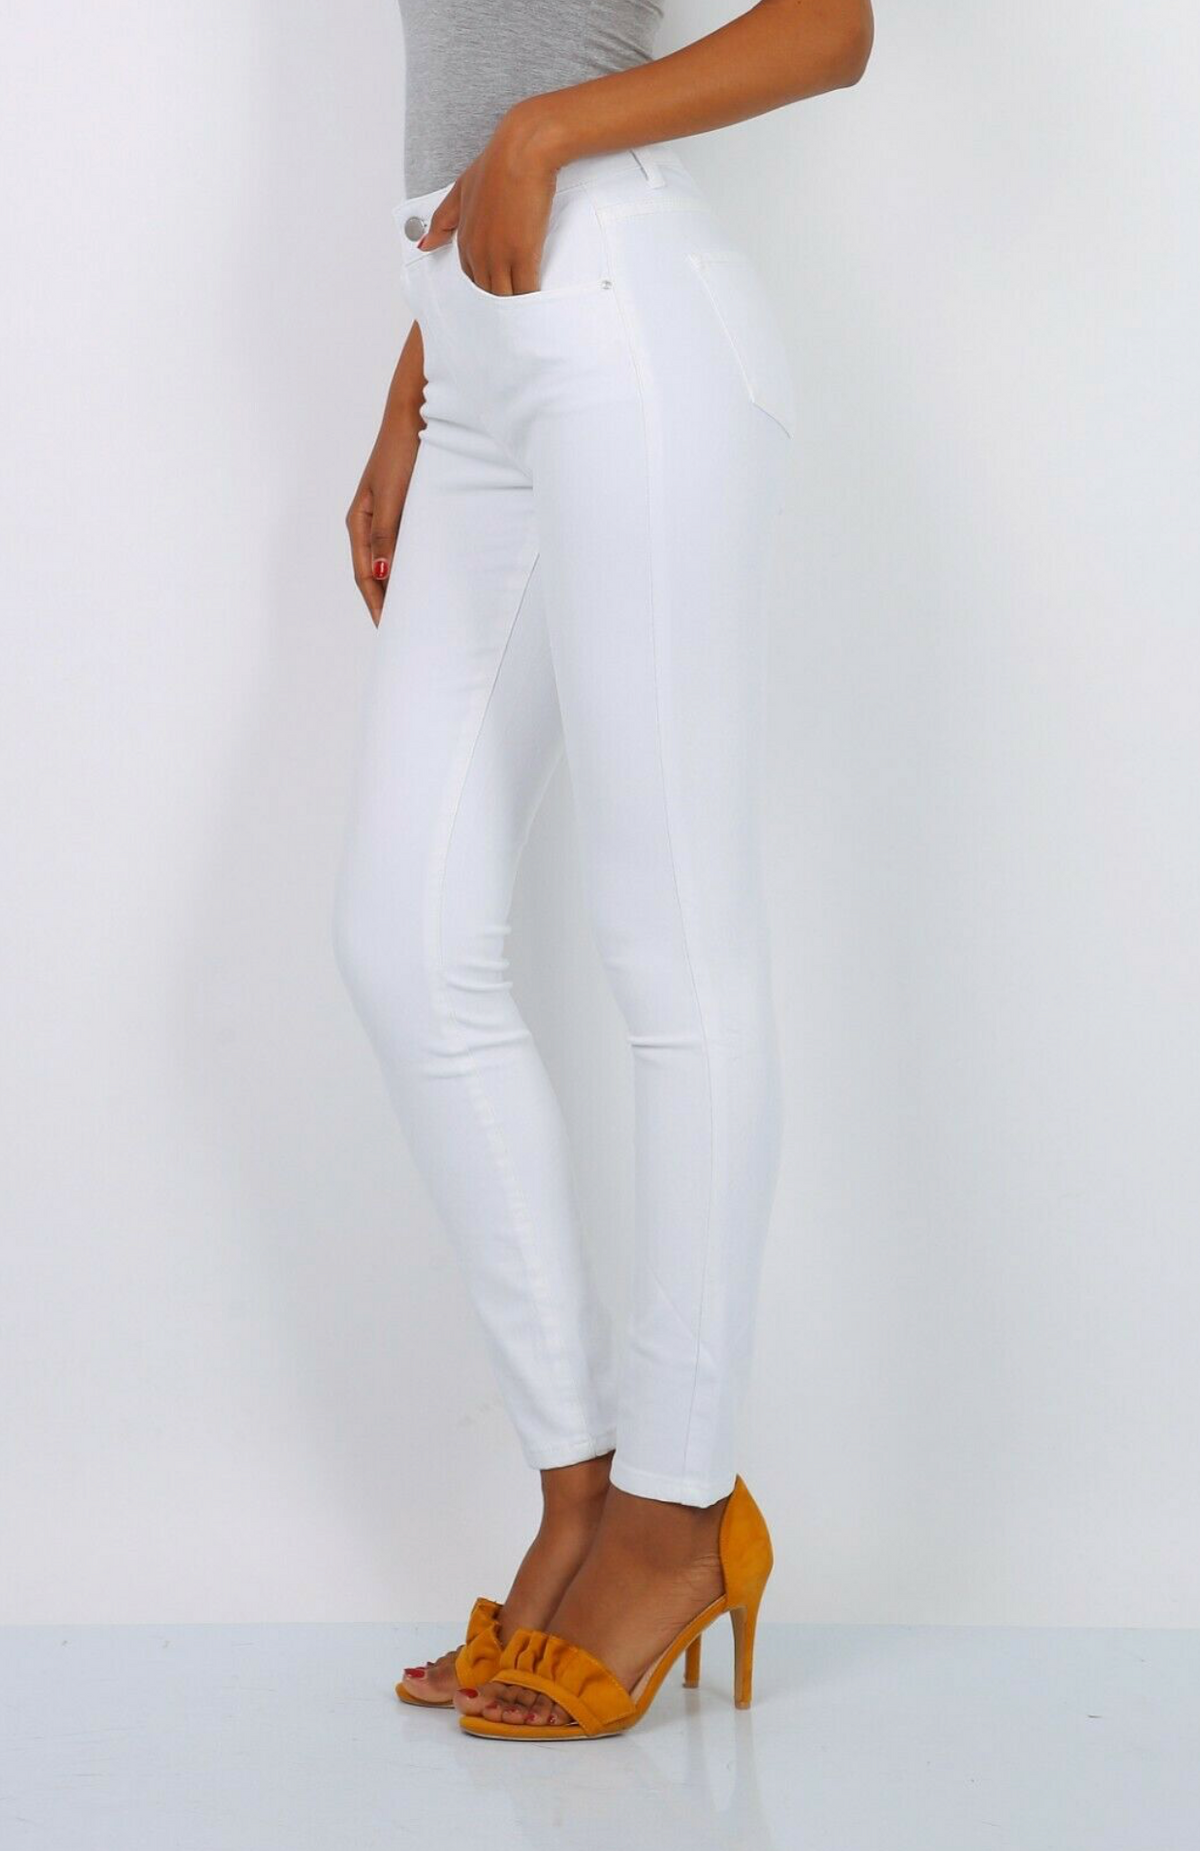 Toxik HighWaisted Bum Lift 360 Jeans, White freeshipping - Ruby 67 Boutique